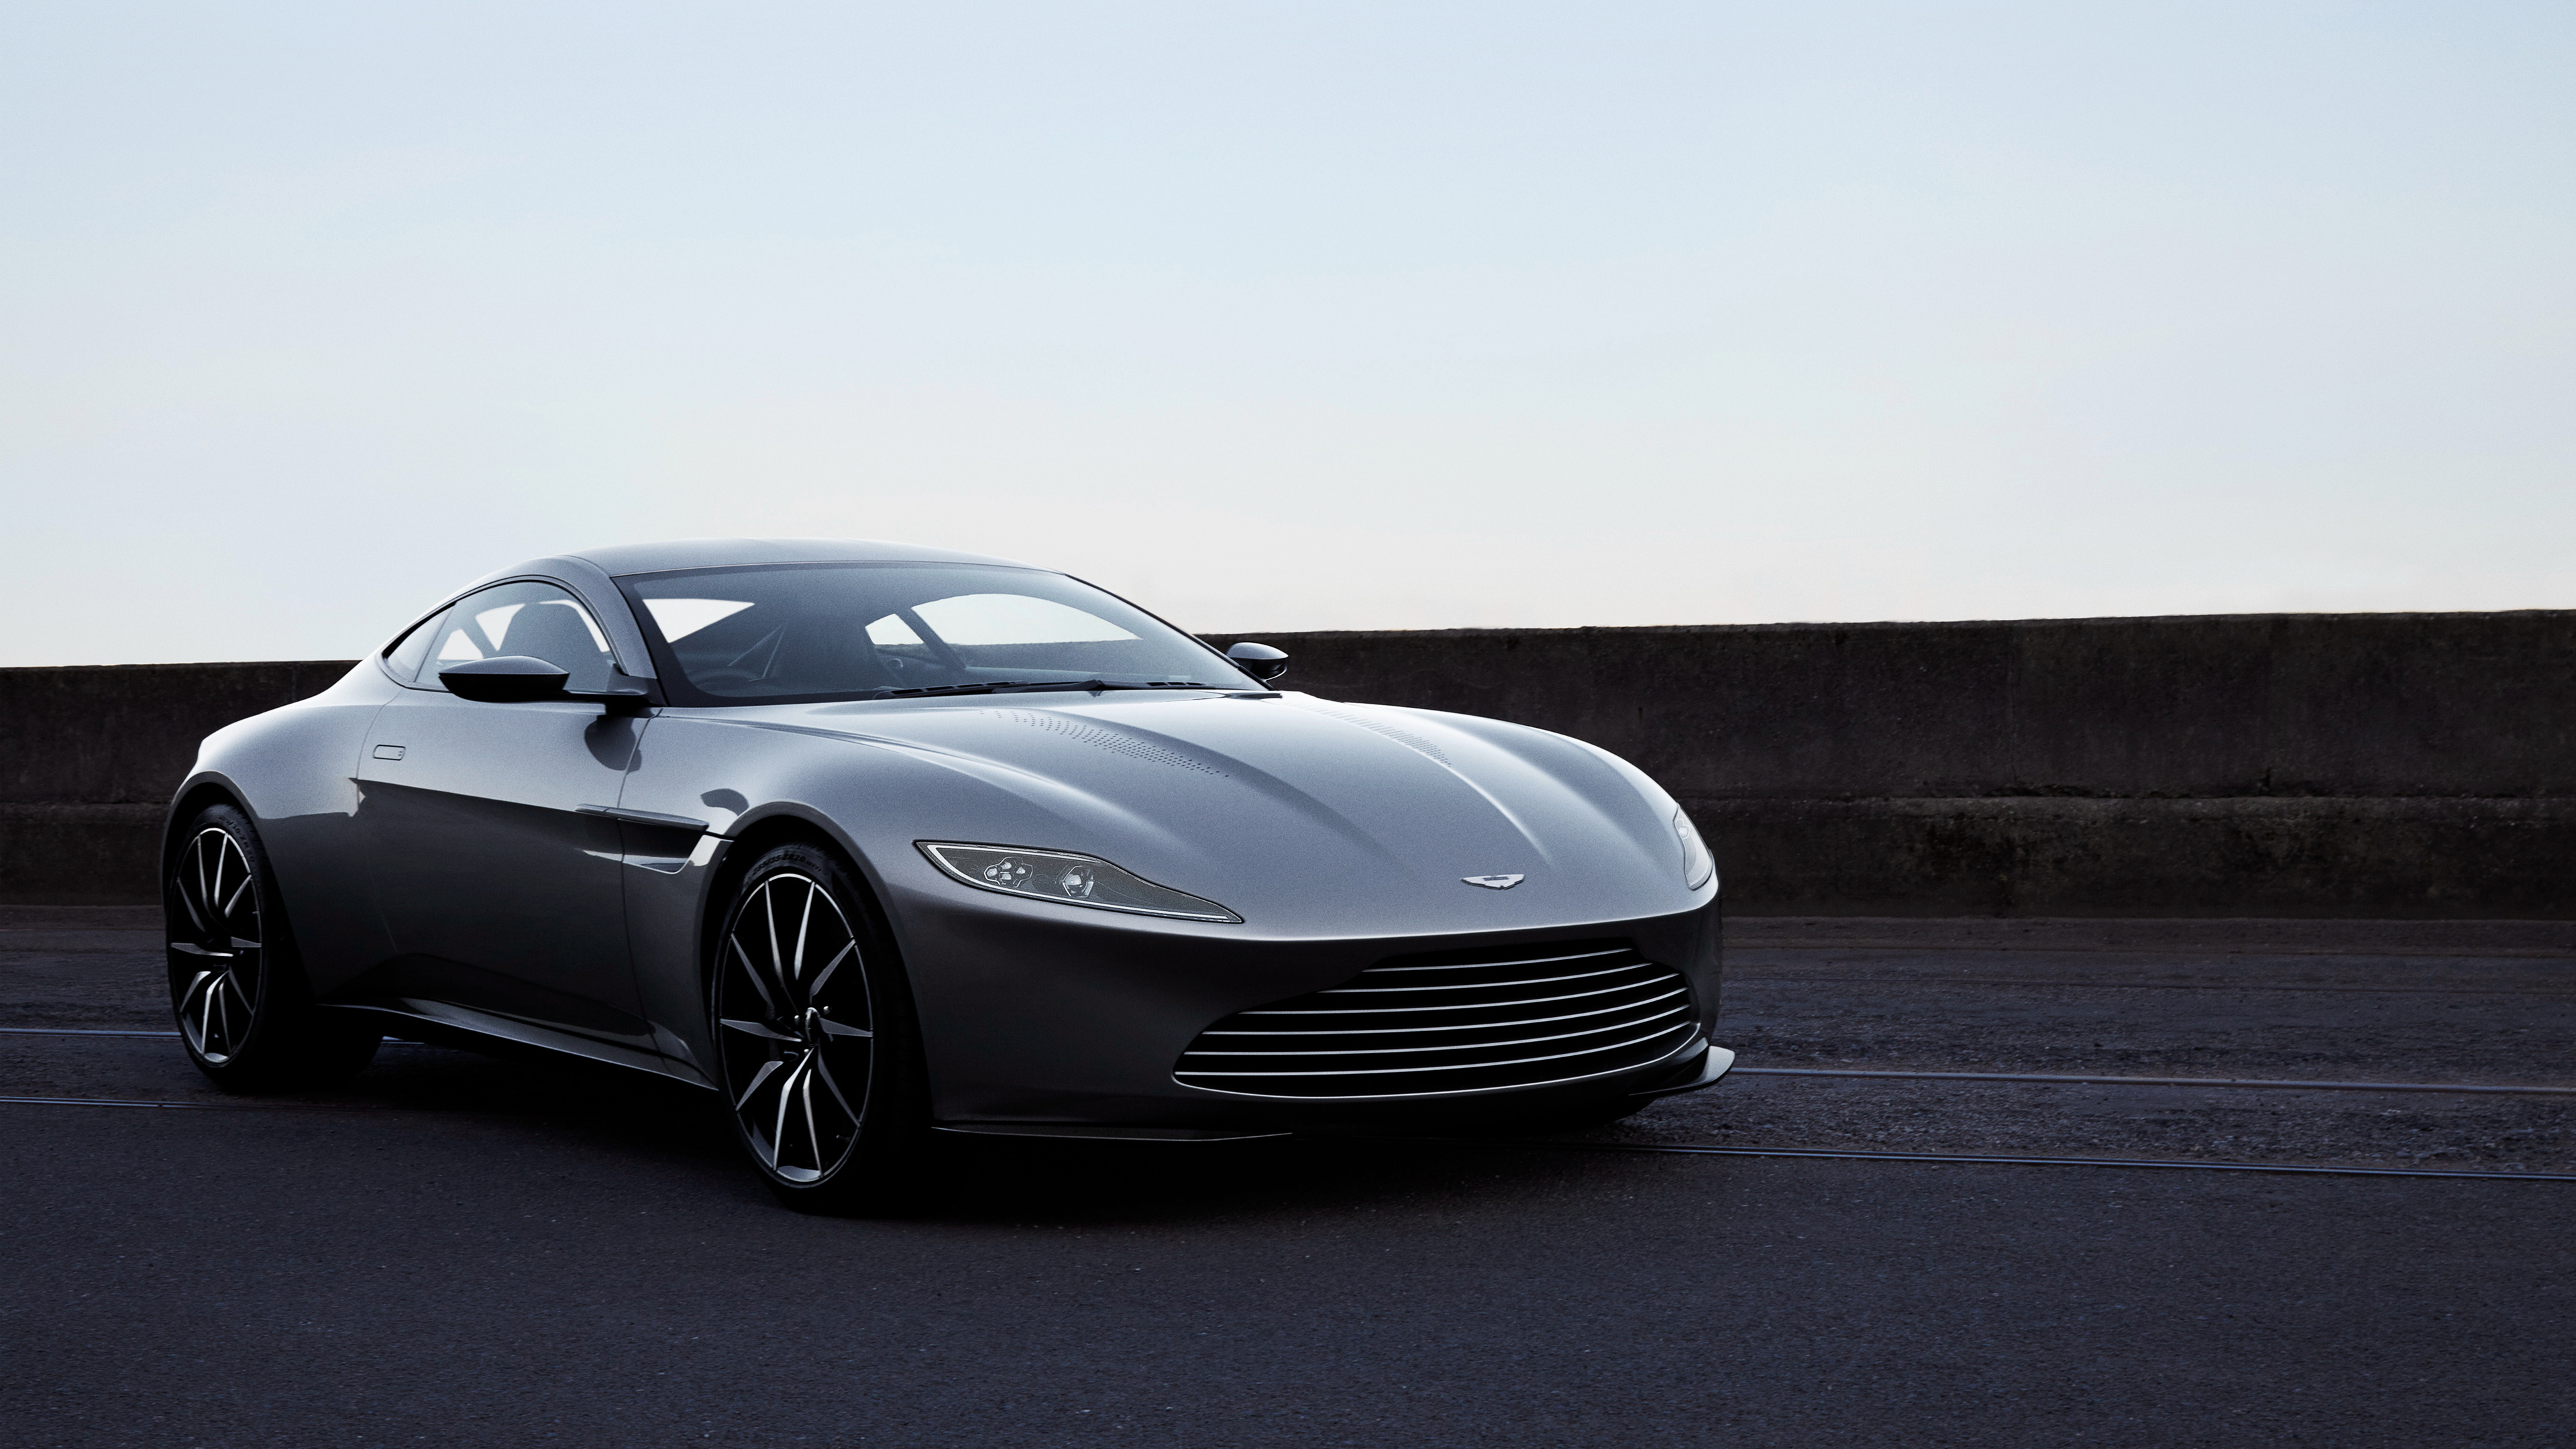 aston HD wallpapers and aston desktop backgrounds up to 8K [7680x4320 